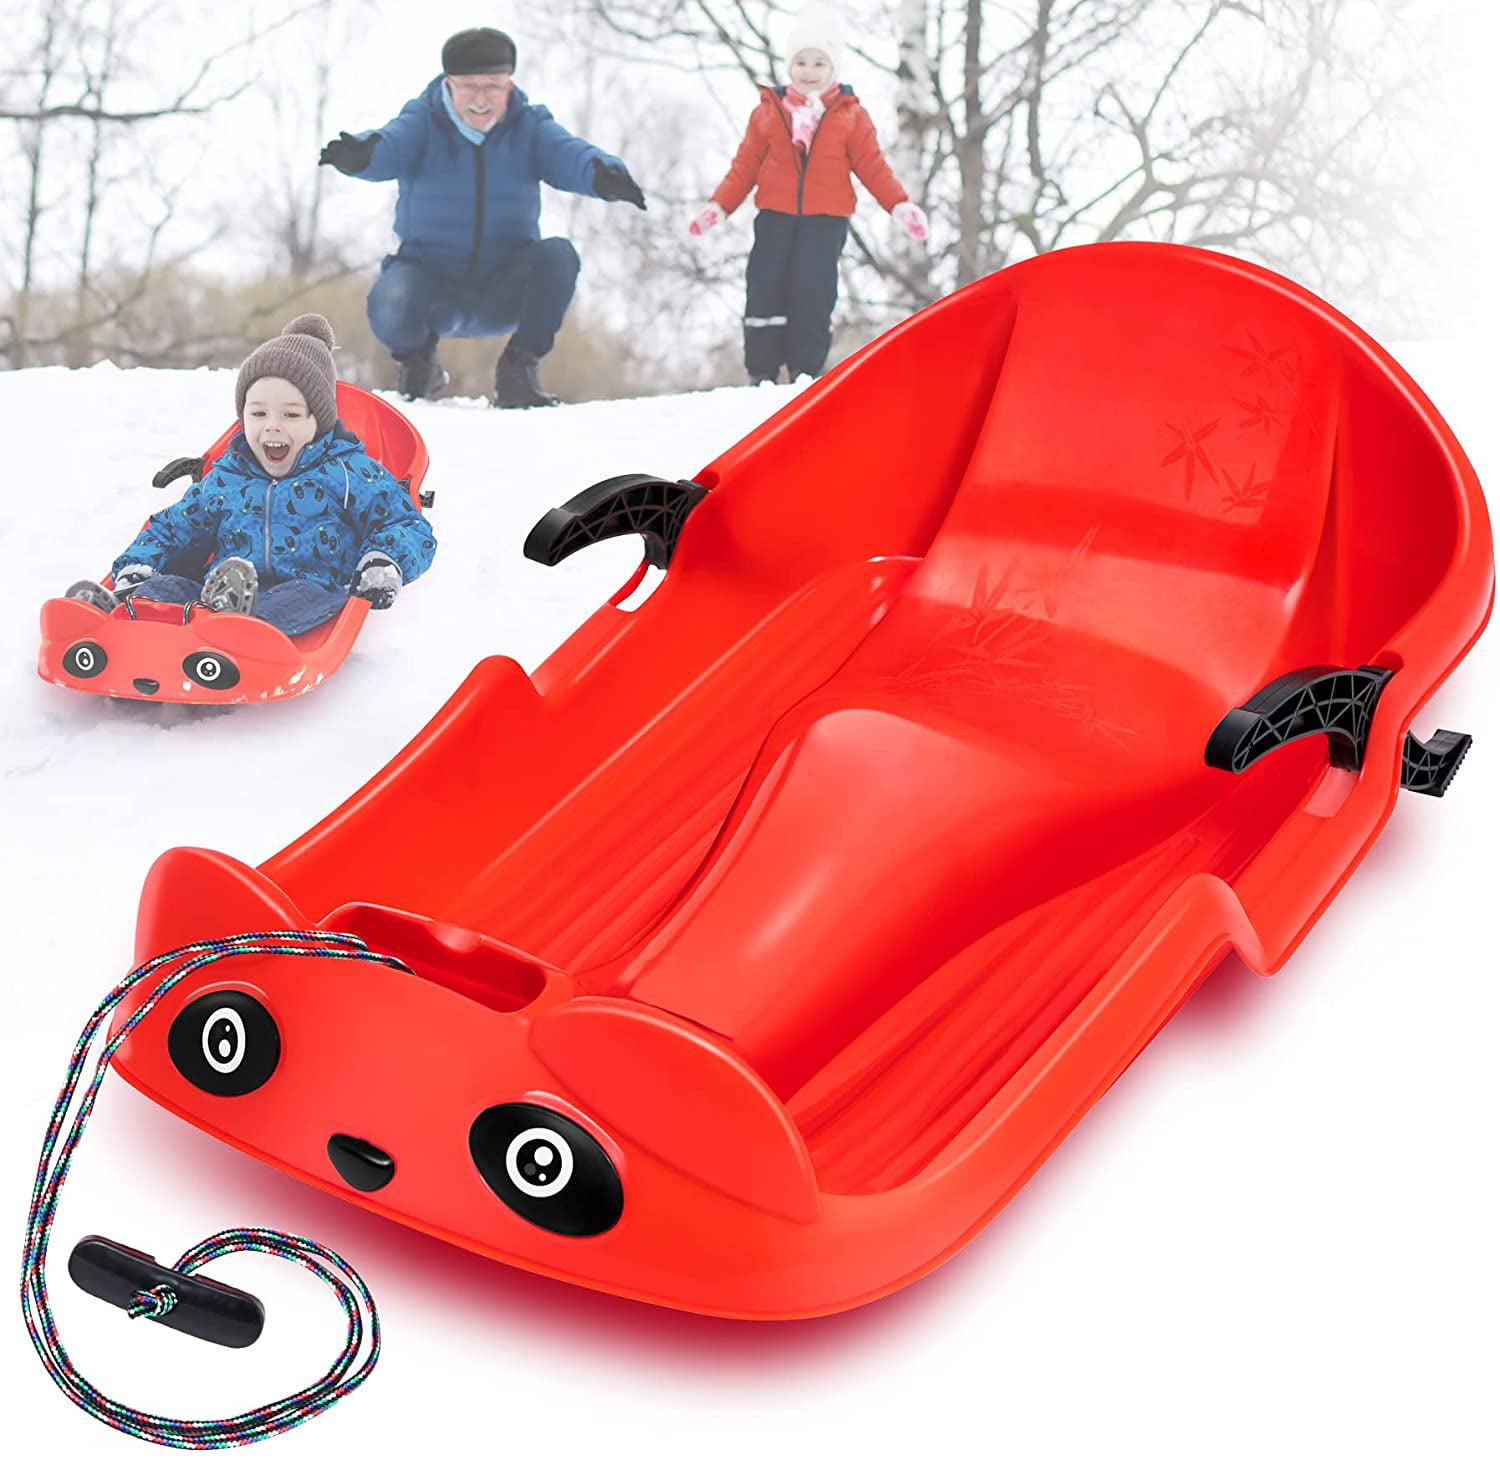 Inflatable Sleigh Heavy Adult Snow Tube with Handles and Traction Rope for Children and Adults Perfect for Outdoor Skiing in Winter,70cm 